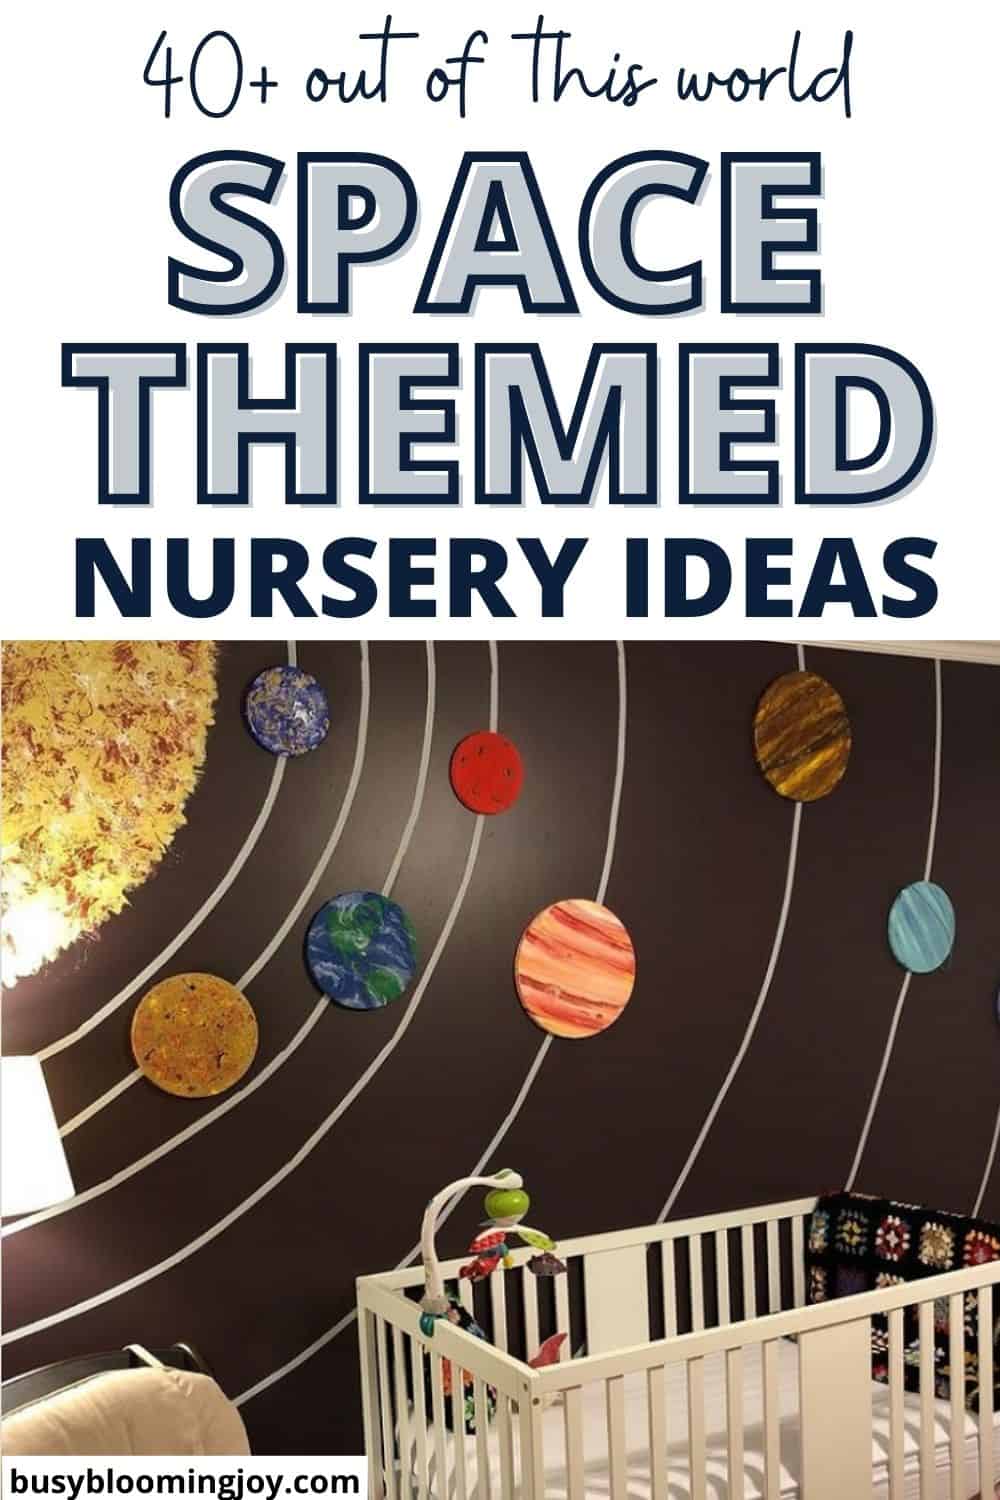 outer space nursery theme ideas feature image